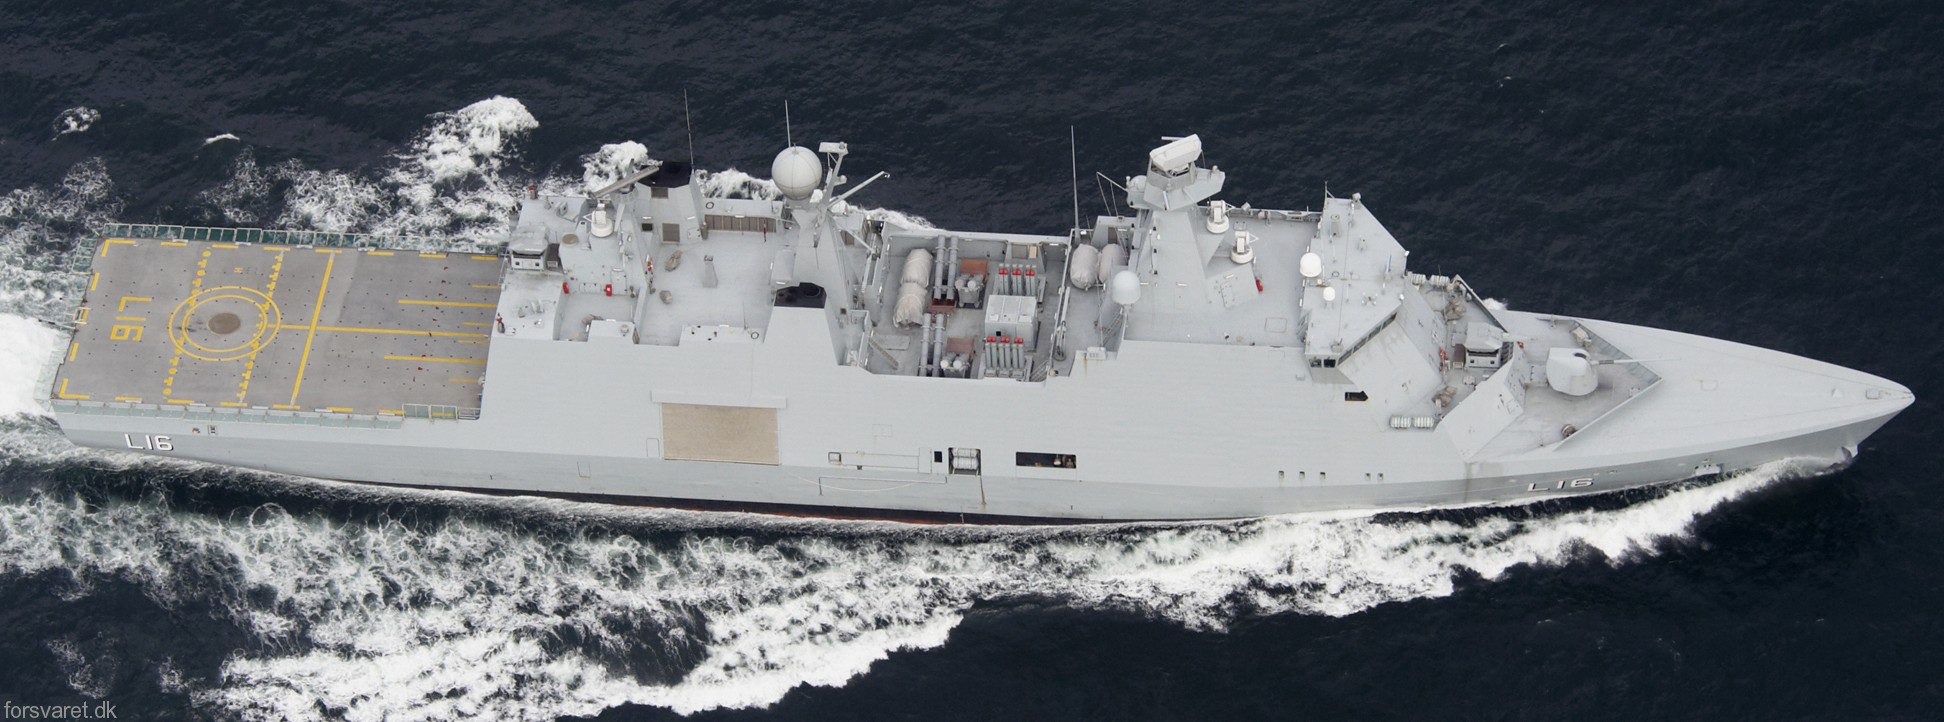 l-16 hdms absalon command support ship frigate royal danish navy 60